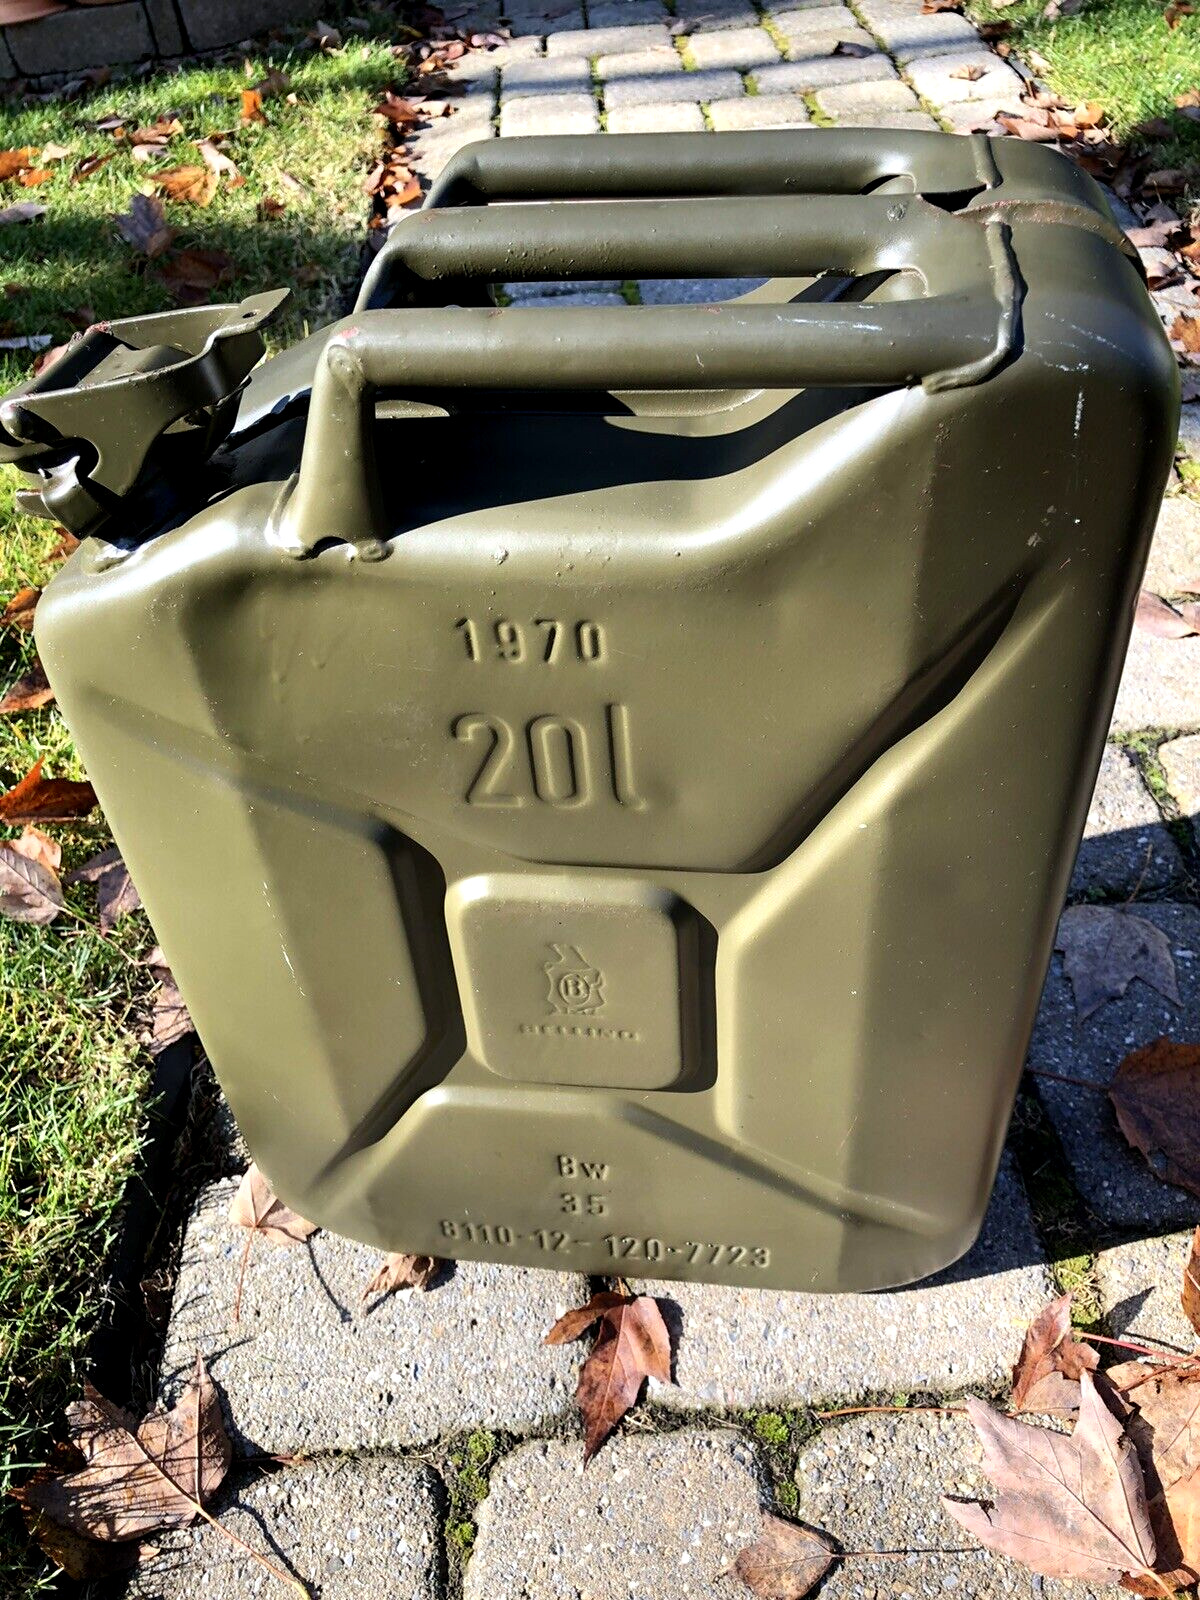 VINTAGE ORGINAL 20 L BELLINO GAS JERRY FUEL CAN / GERMANY 1970 MILITARY / CLEAN